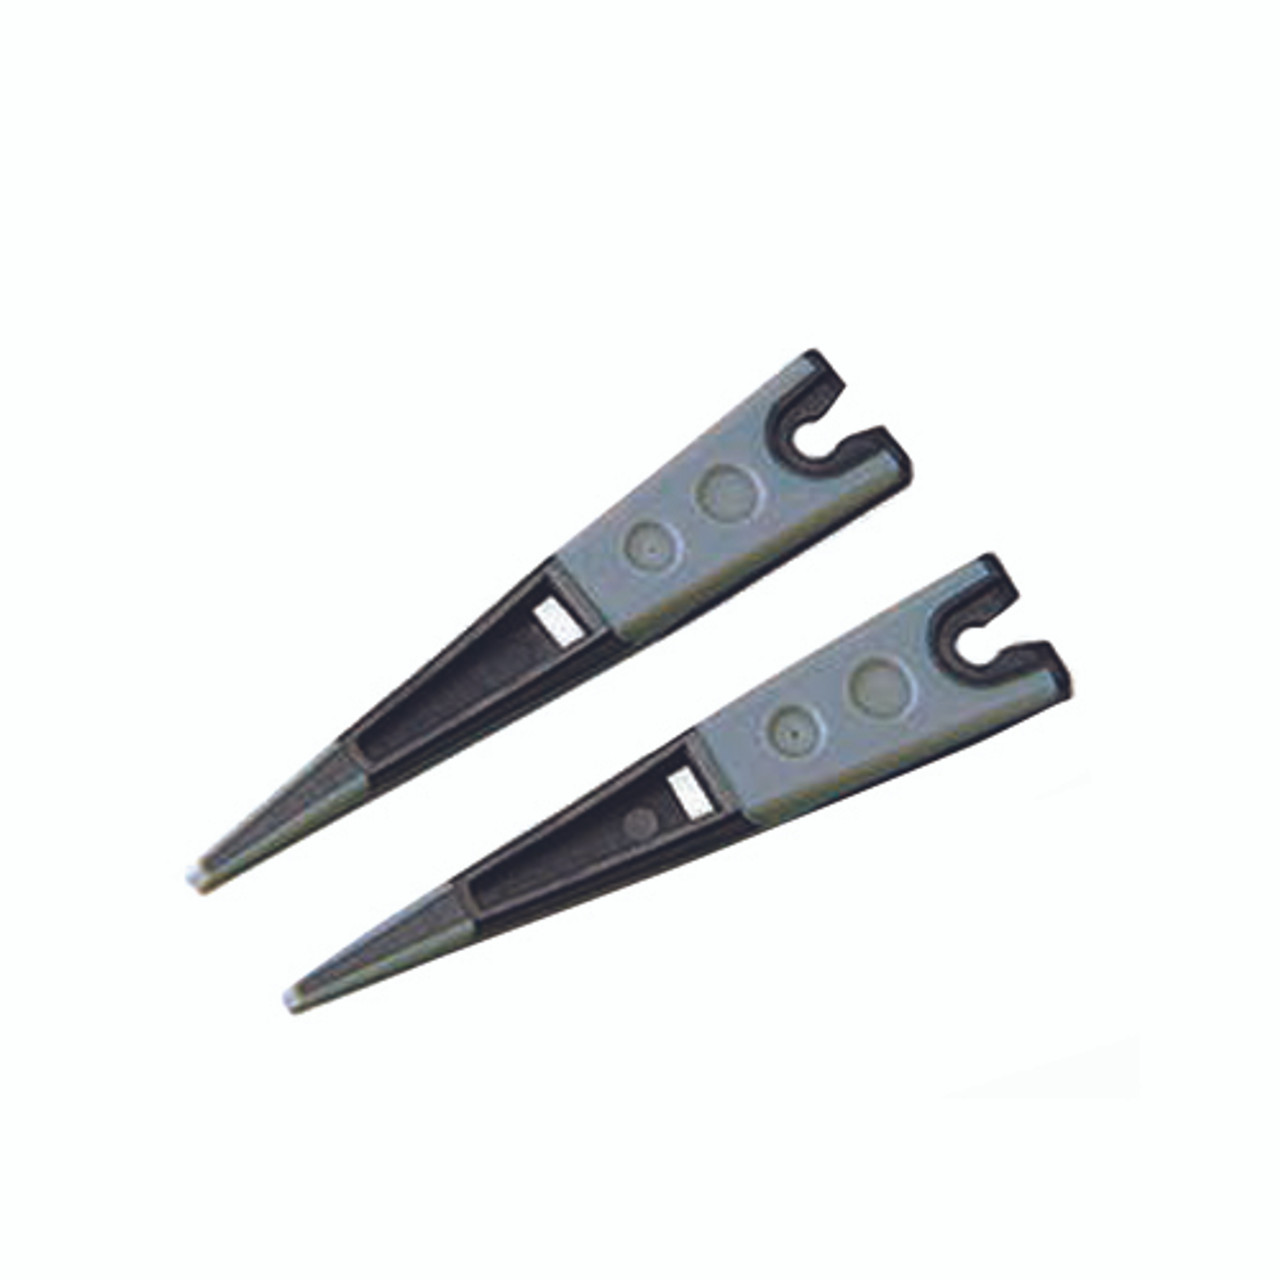 Replacement Tips for D-Master Soft Tip Tweezers